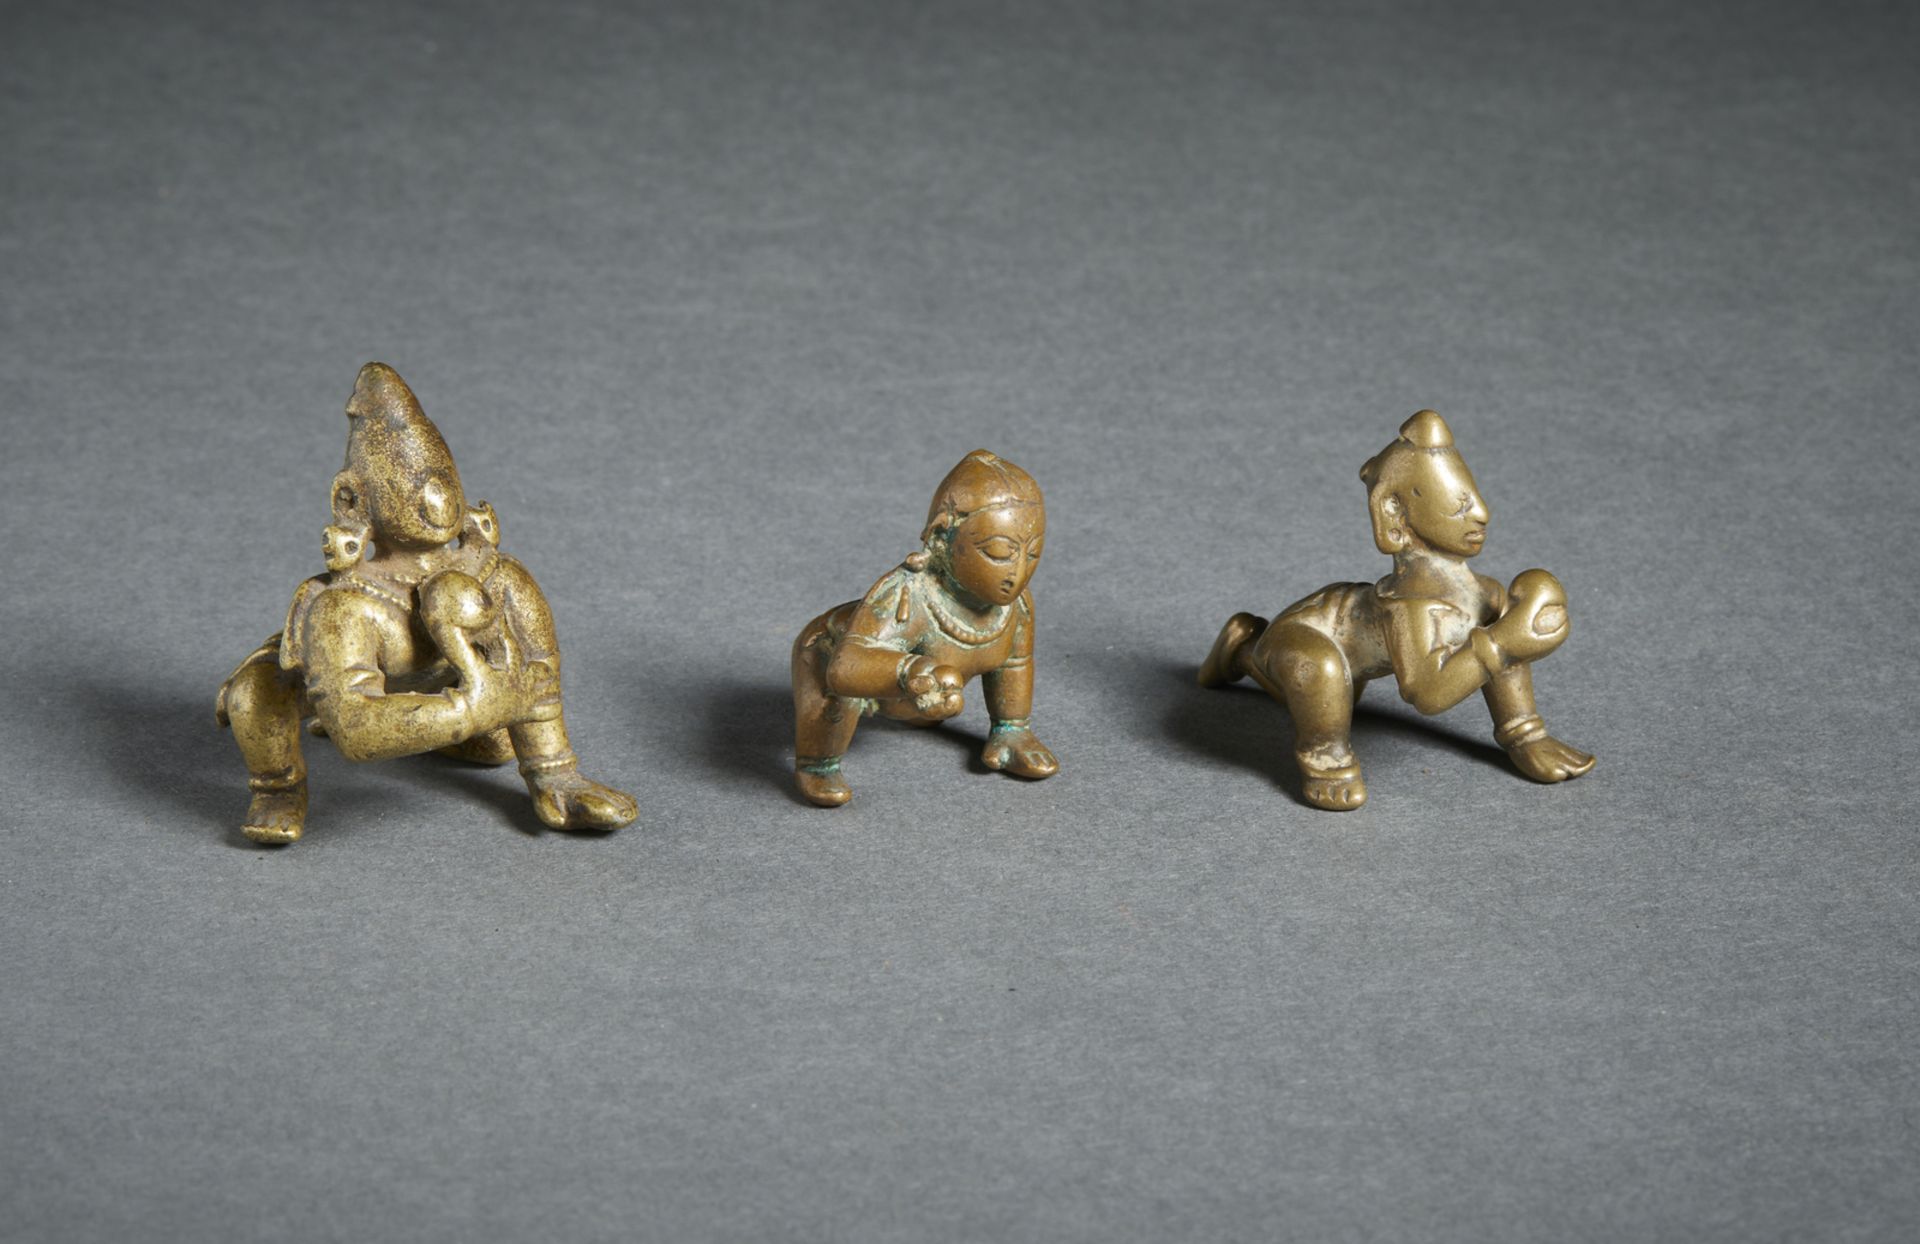 A group of three copper alloy Balakrishna Central and Southern India, 18th century Altre misure: 4x3